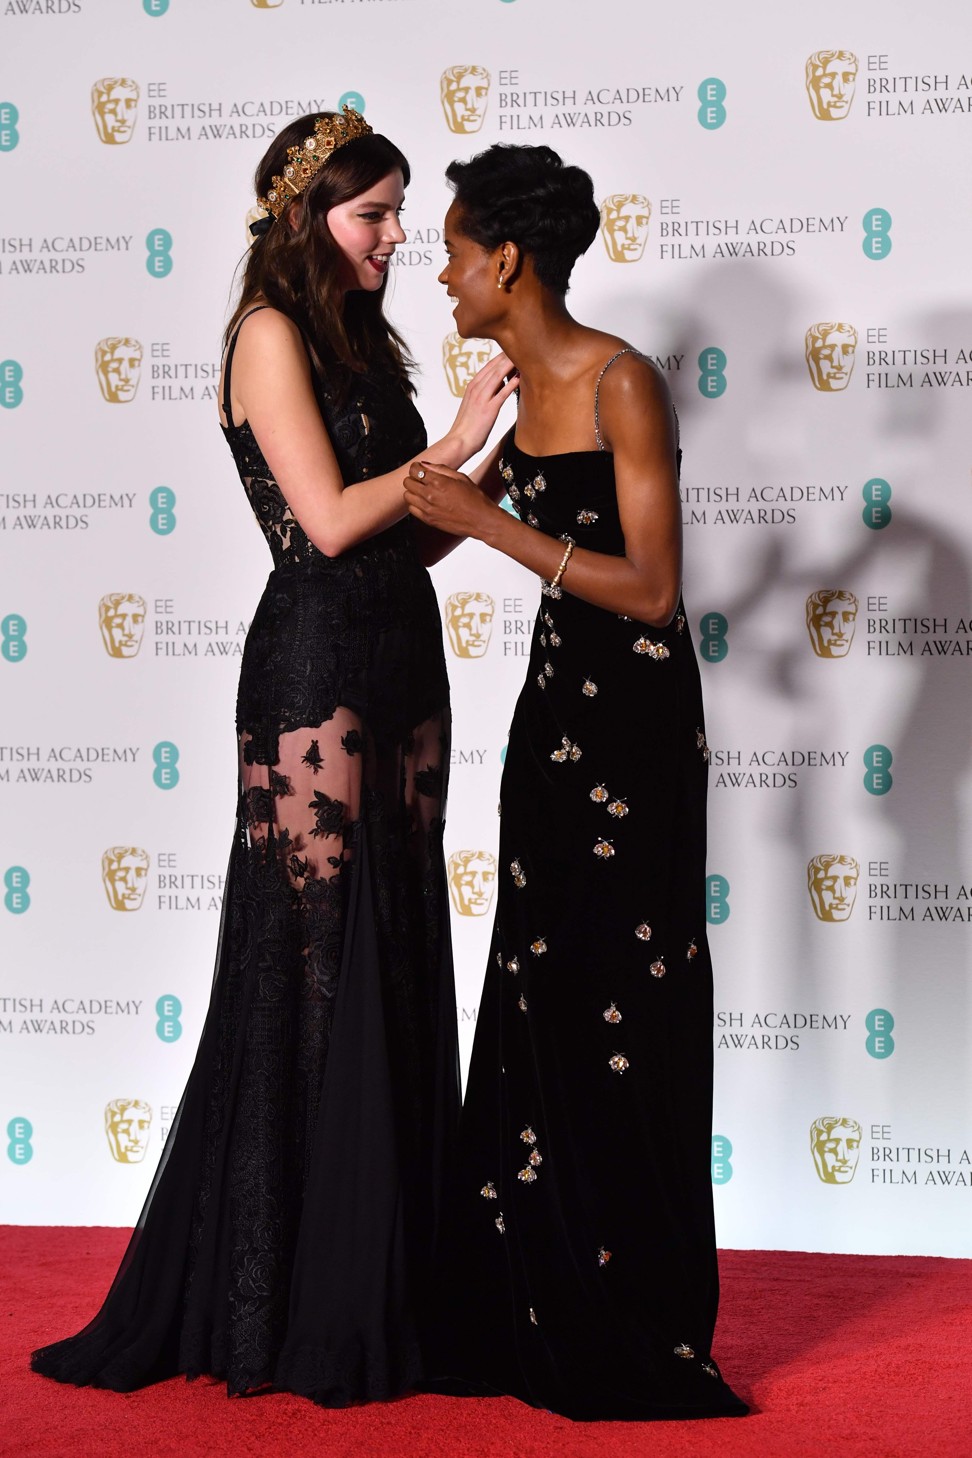 US actress Anya Taylor Joy (left, star of ‘Split’) and Guyanese actress Letitia Wright (right, of ‘Black Panther’ fame) pose in the press room after presenting an award at the Baftas. Photo: AFP